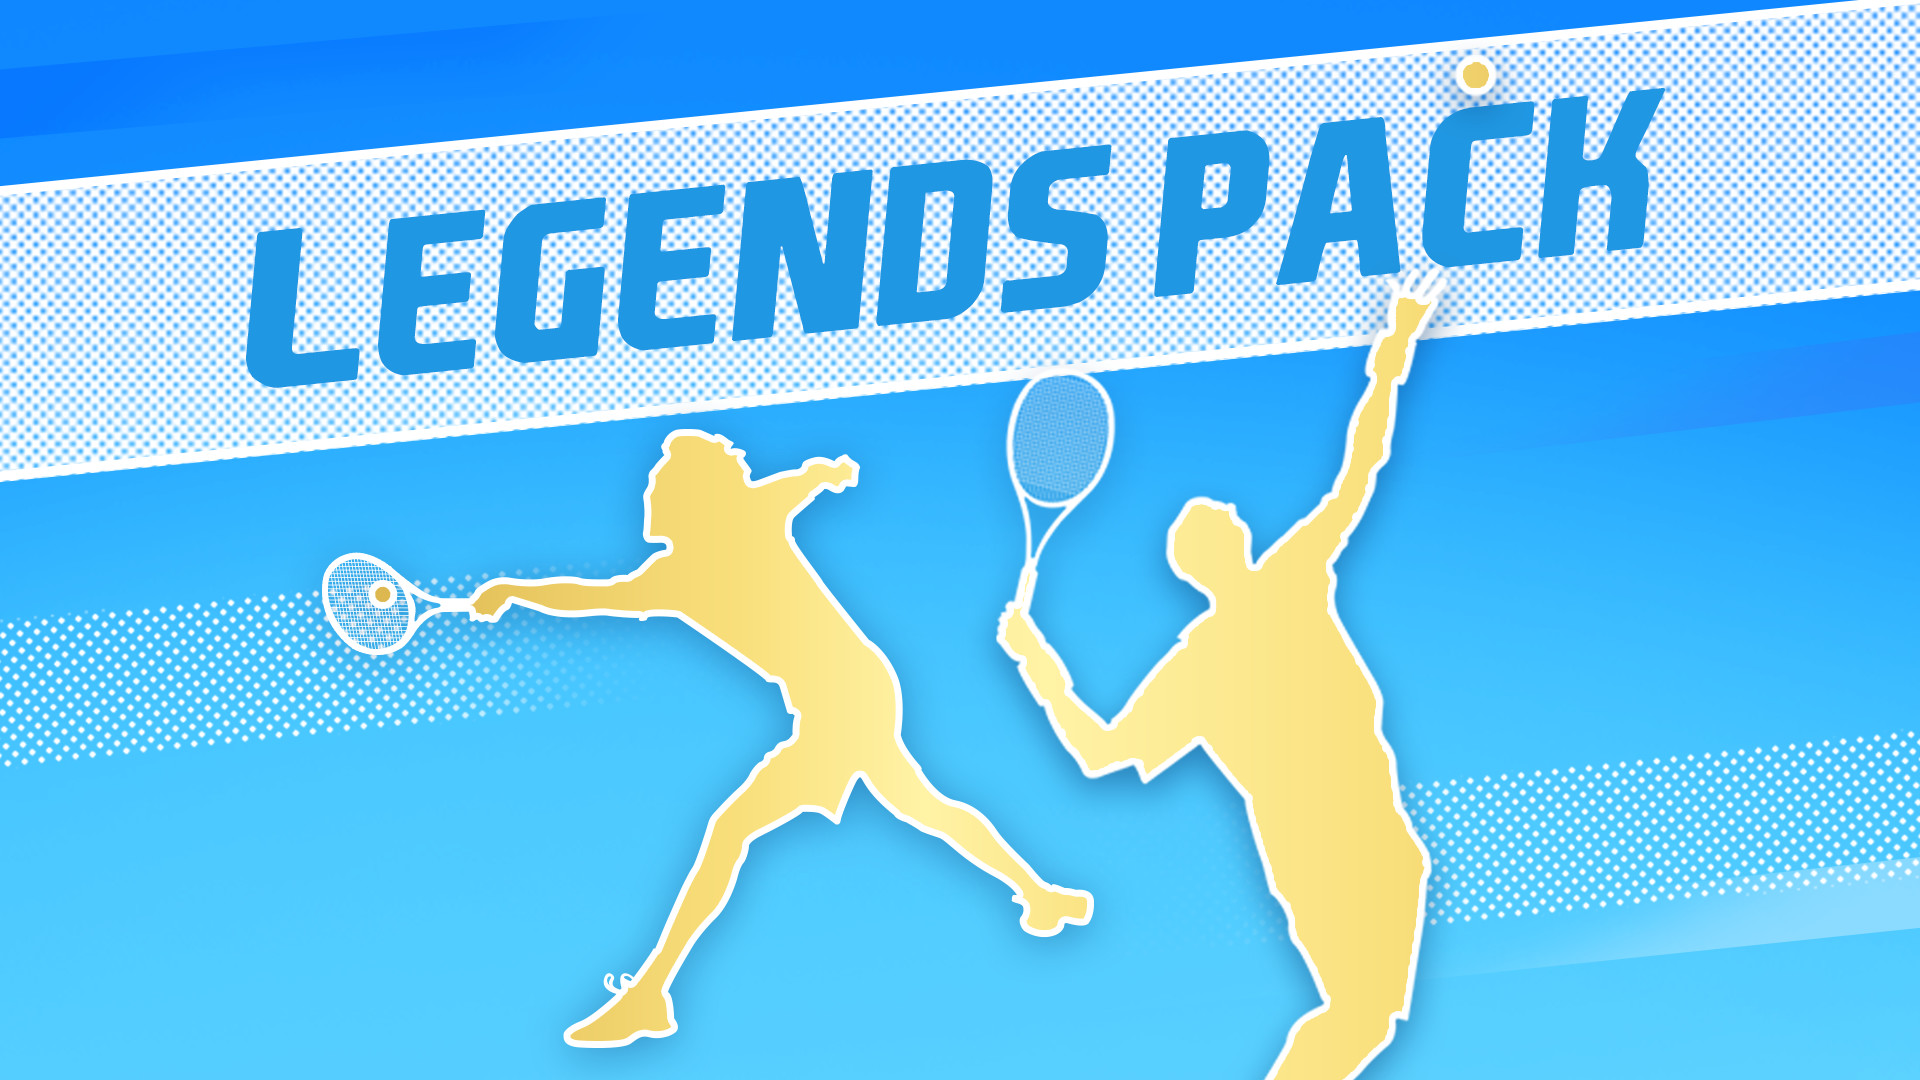 Save 35% on Tennis World Tour 2 Legends Pack on Steam